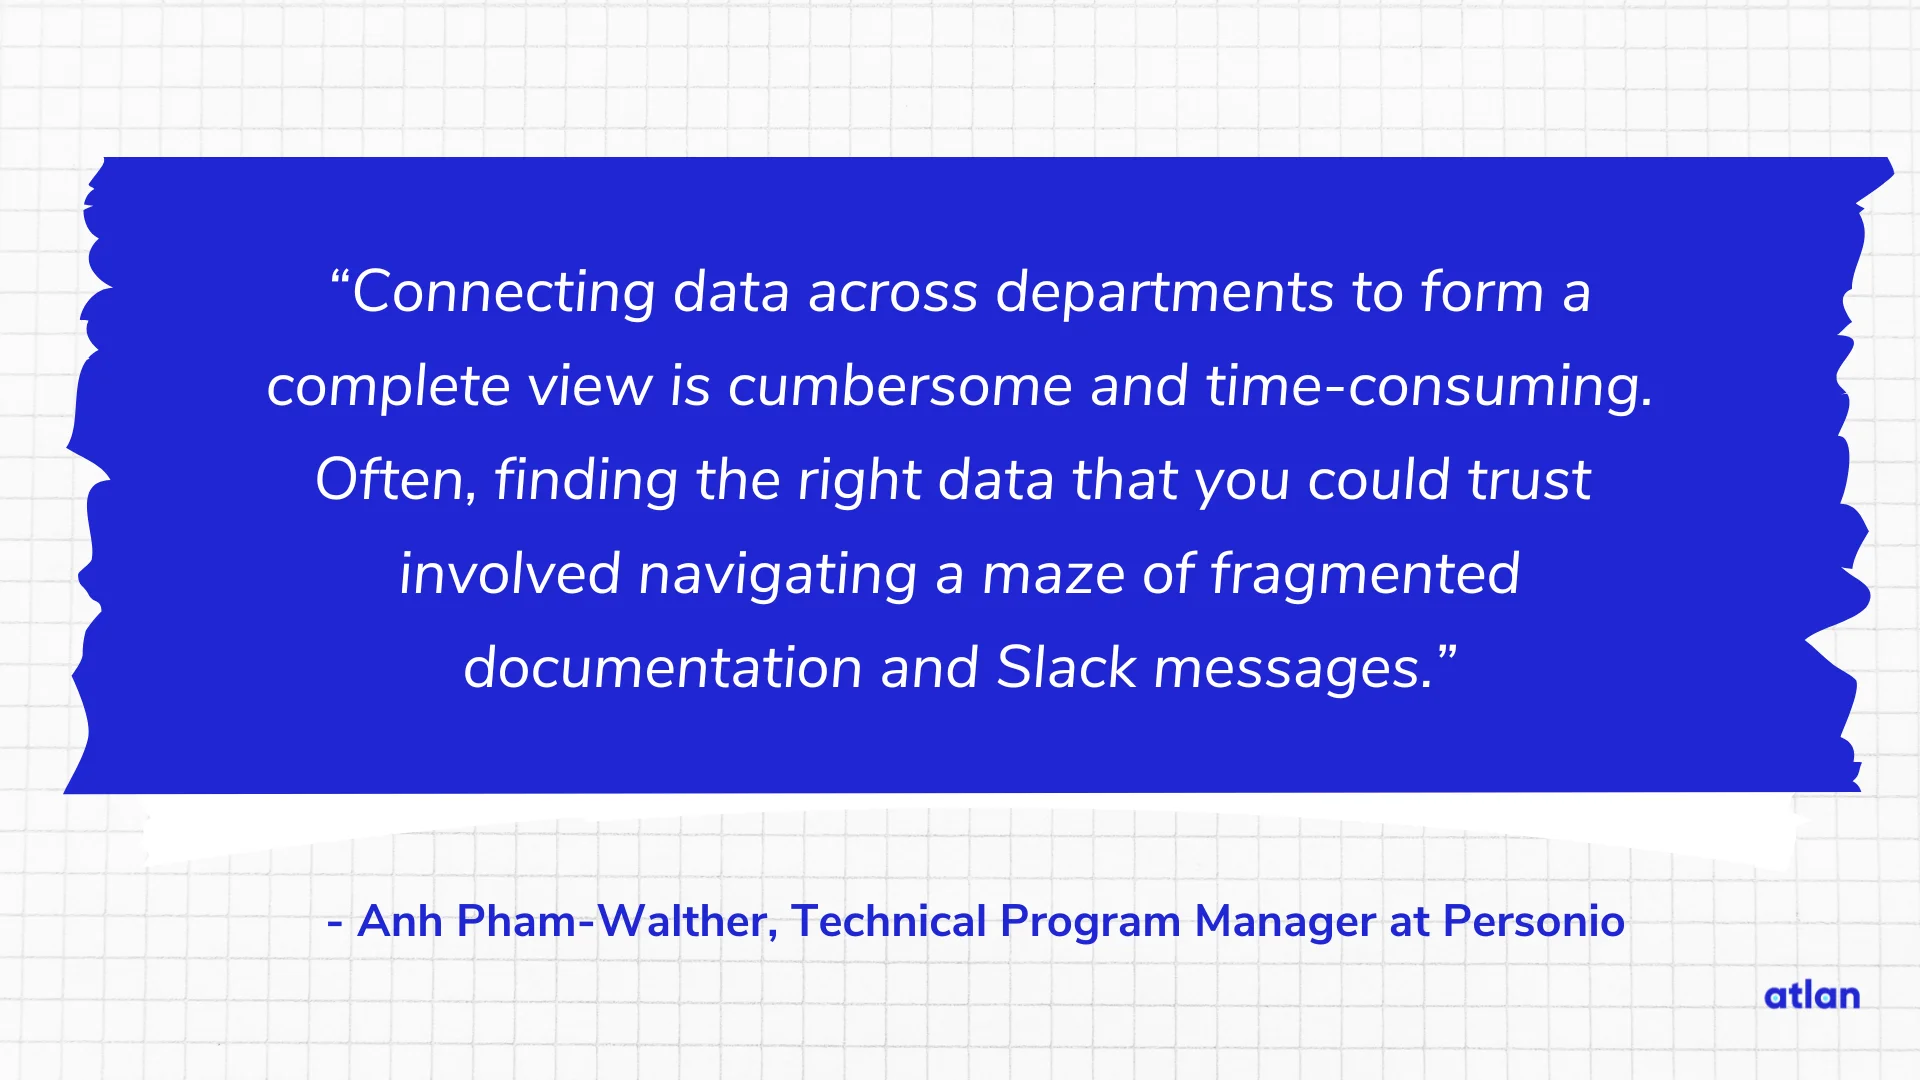 Connecting data across departments to form a complete view is cumbersome and time-consuming